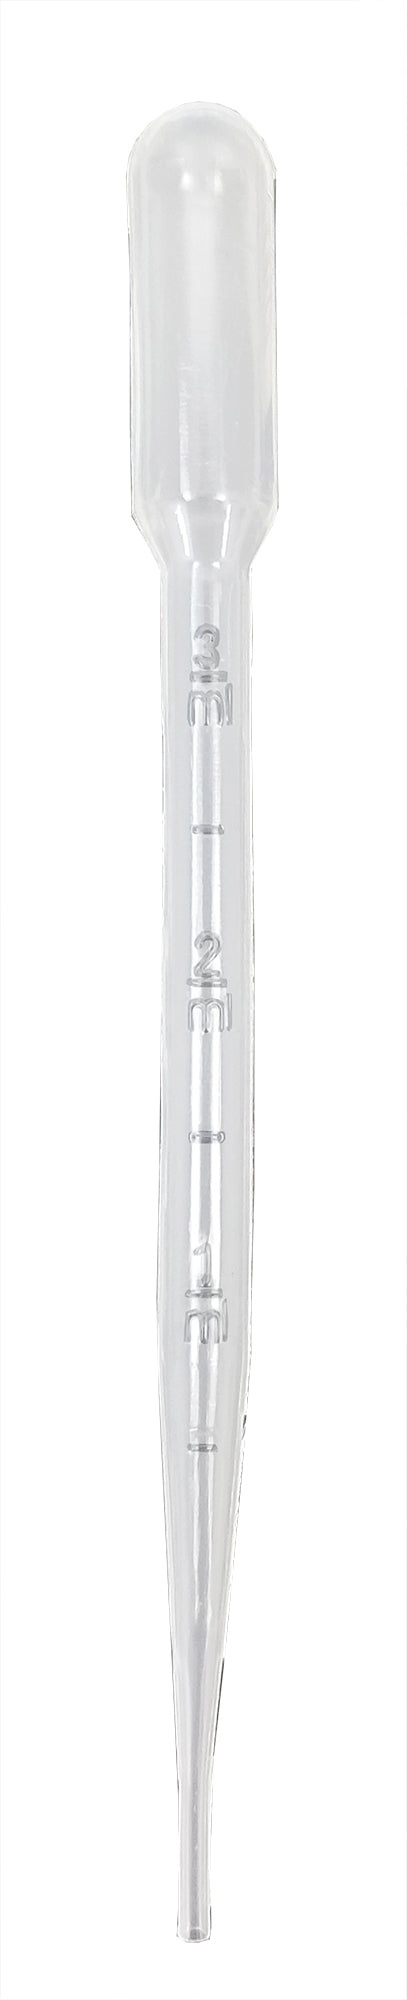 Gsc International Disposable Transfer Pipettes, 7Ml Capacity, Graduated 3Ml By 1/2Ml, Pack Of 100